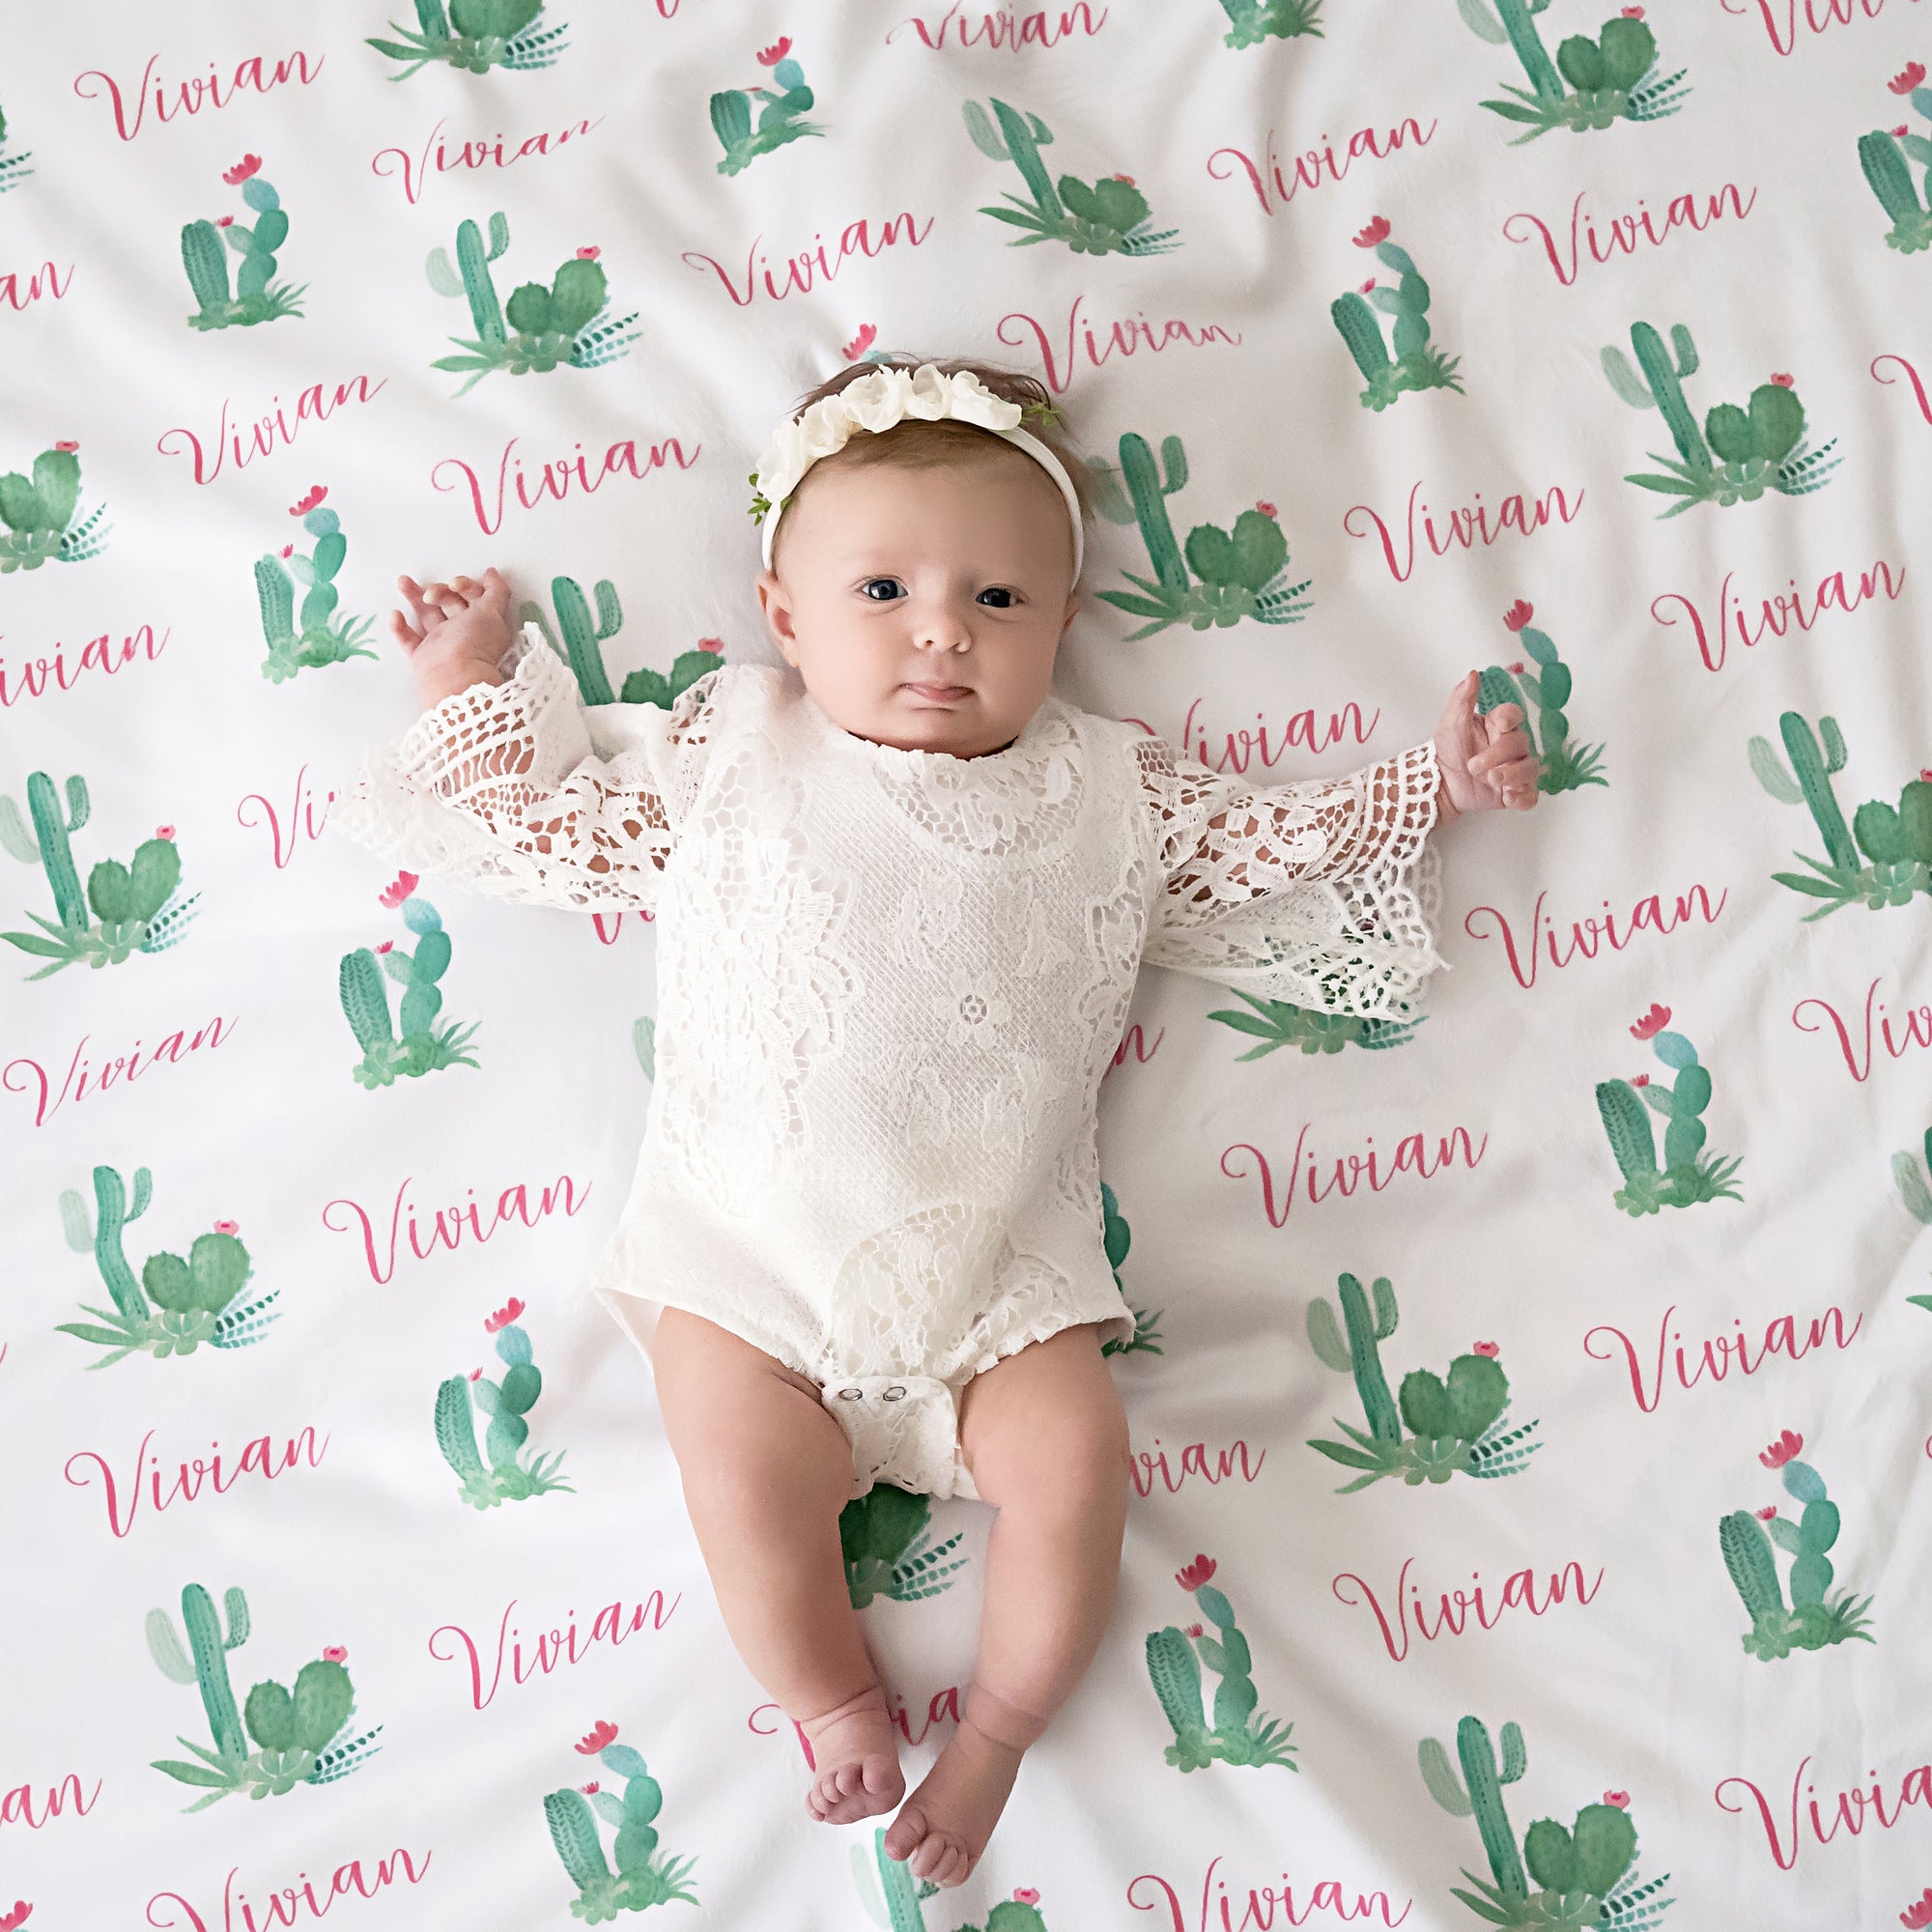 Personalized baby name blanket, cactus, choose your size and fabric